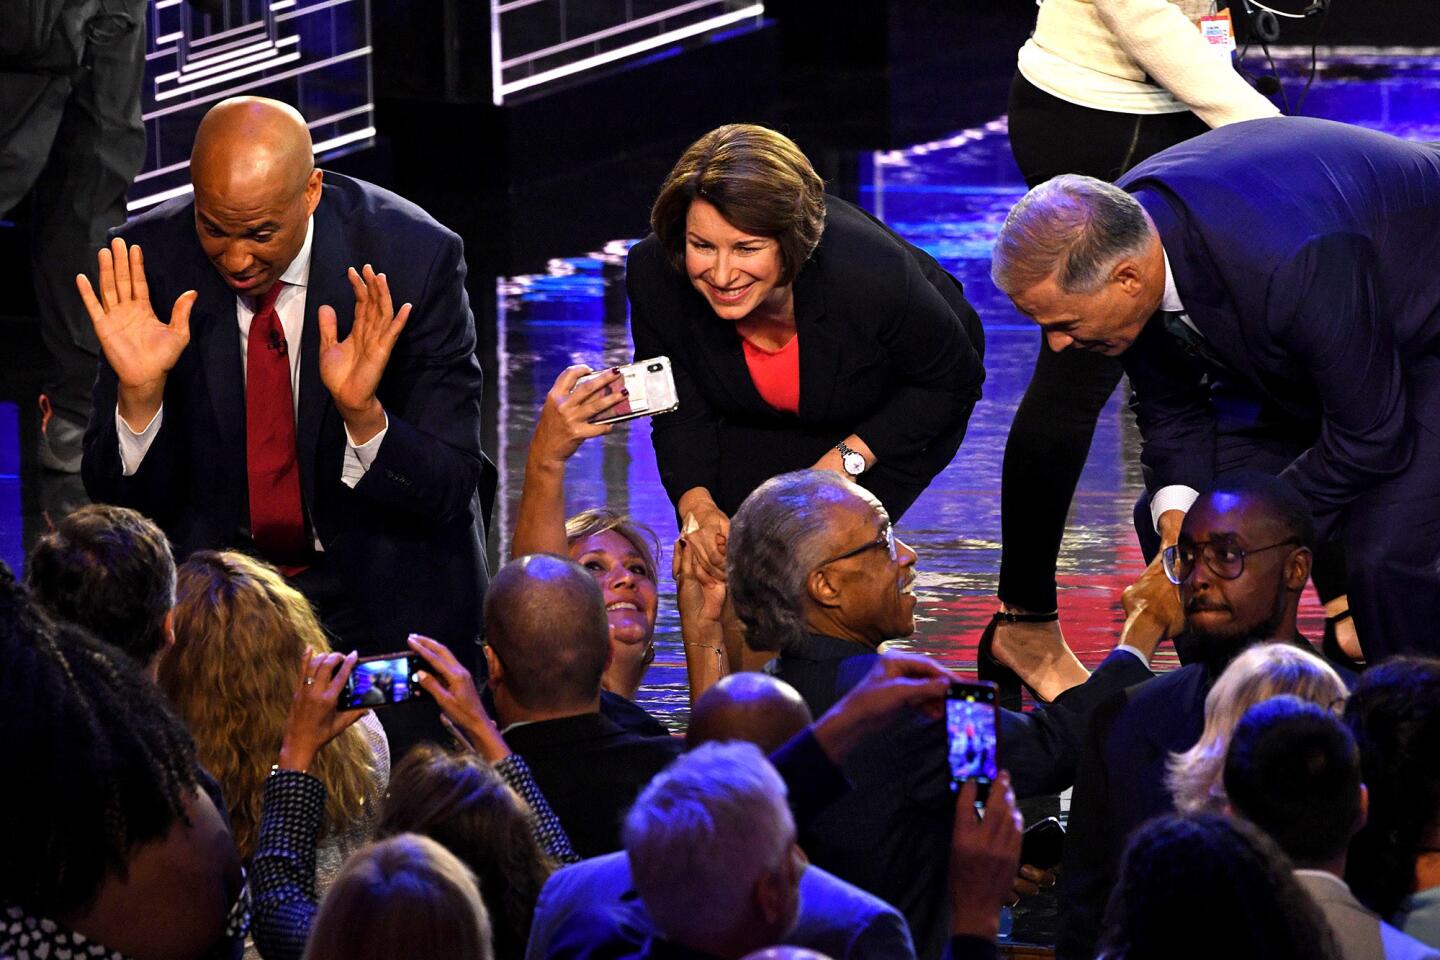 Democratic presidential hopefuls (fromL) US Senator from New Jersey Cory Booker and US Senator from Minnesota Amy Klobuchar greet supporters as Governor of Washington Jay Inslee greets US activist Al Sharpton after participating in the first Democratic primary debate of the 2020 presidential campaign season hosted by NBC News at the Adrienne Arsht Center for the Performing Arts in Miami, Florida, June 26, 2019.